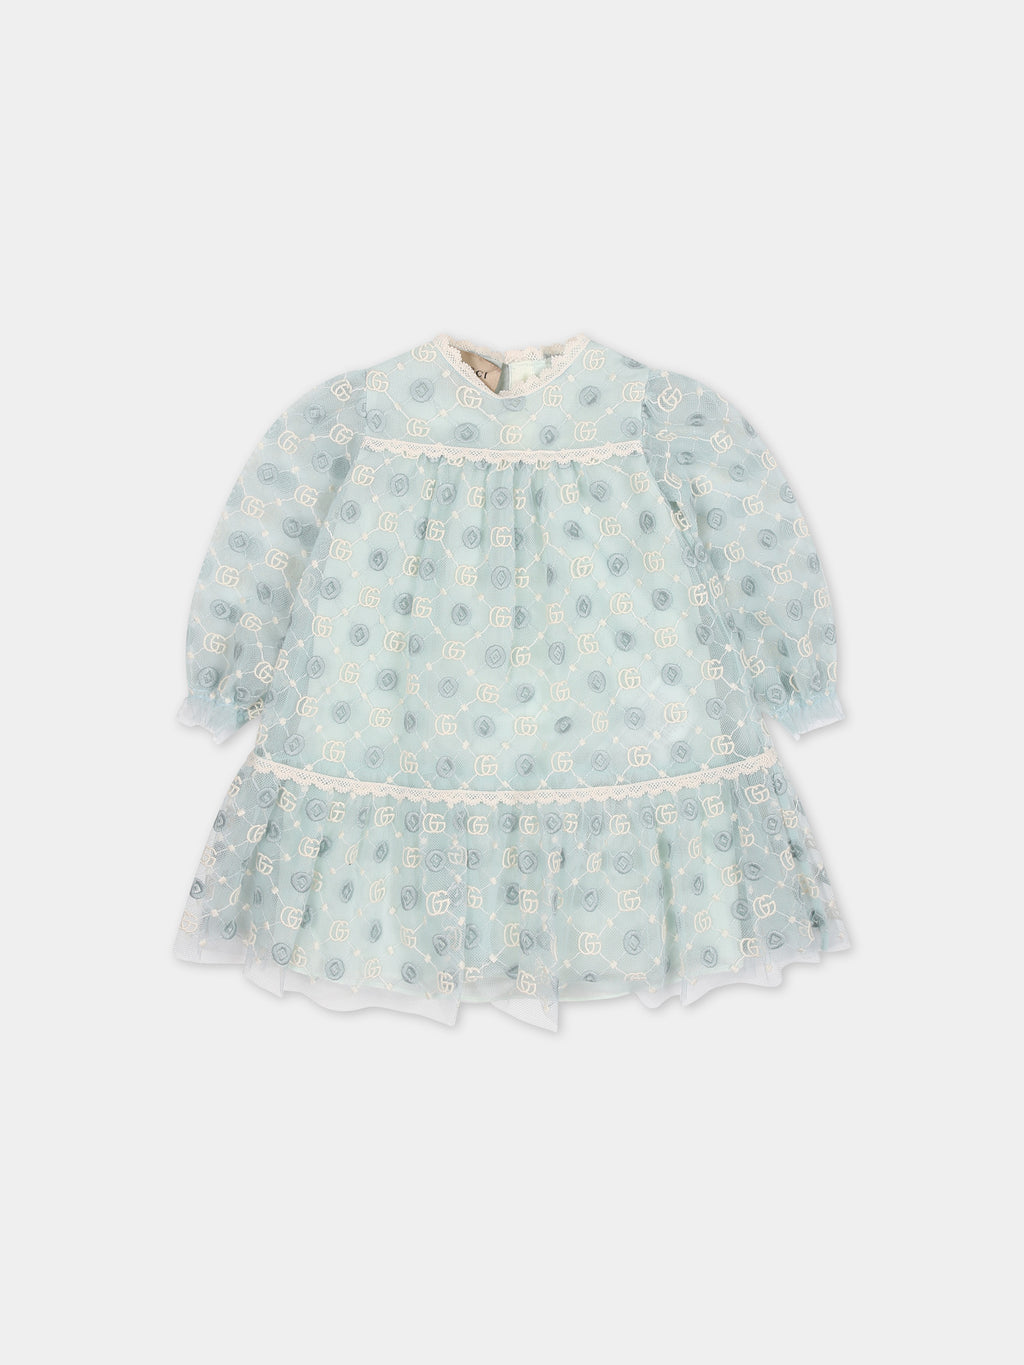 Light blue dress for baby girl with geometric pattern and double G